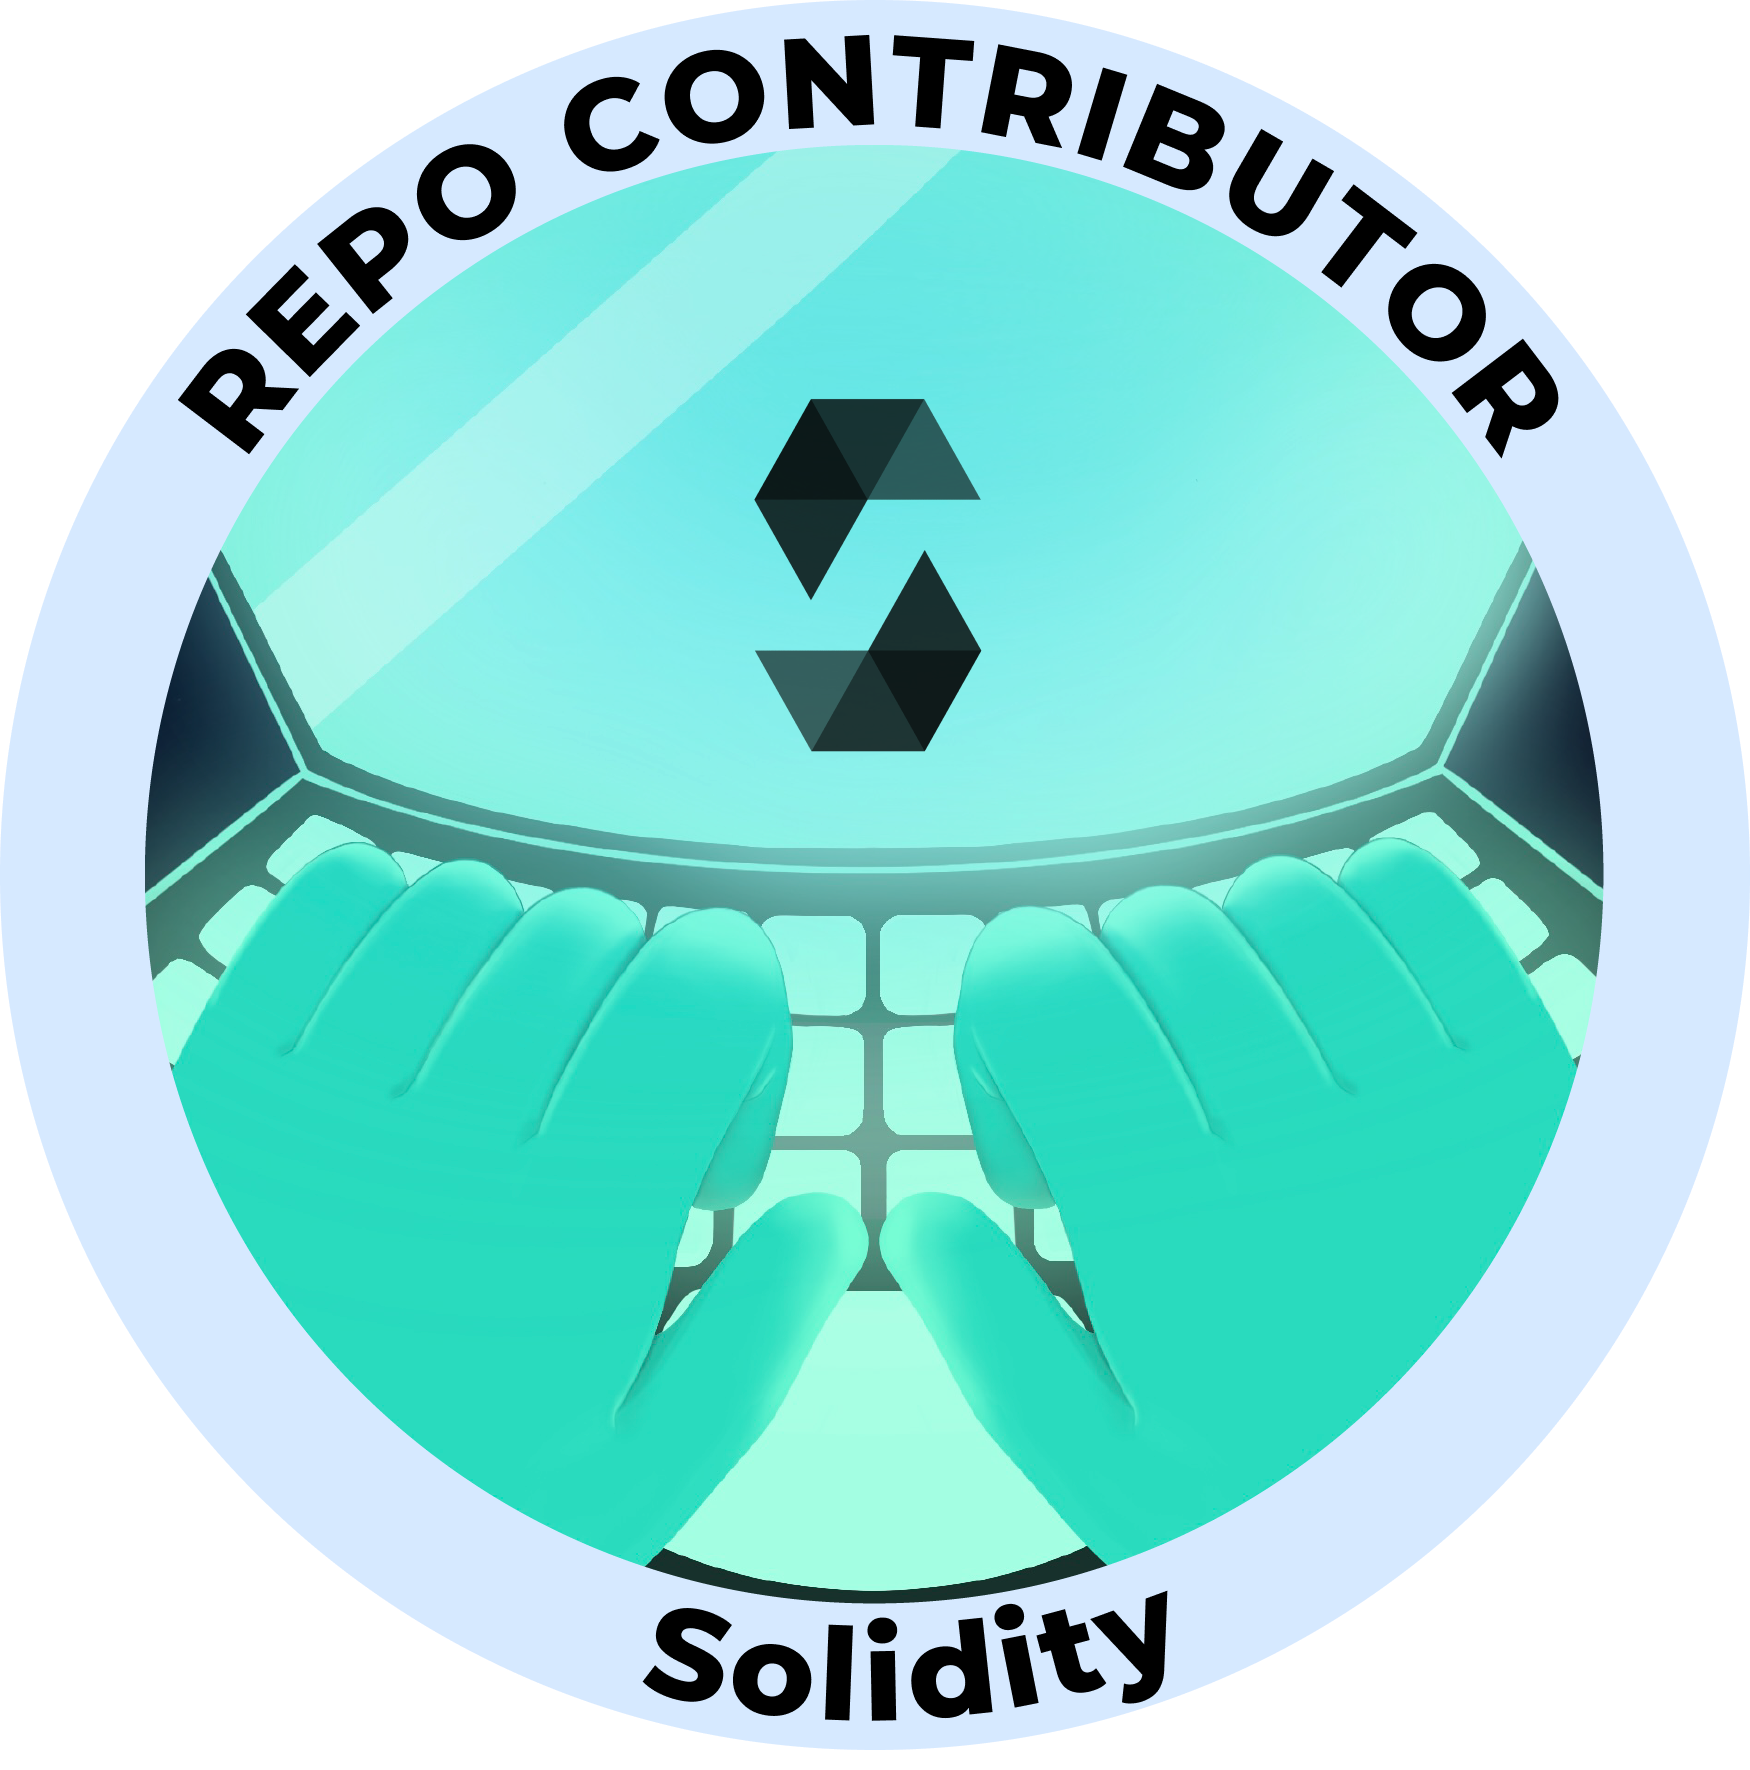 Web3 Badge | Project Contributor: Solidity